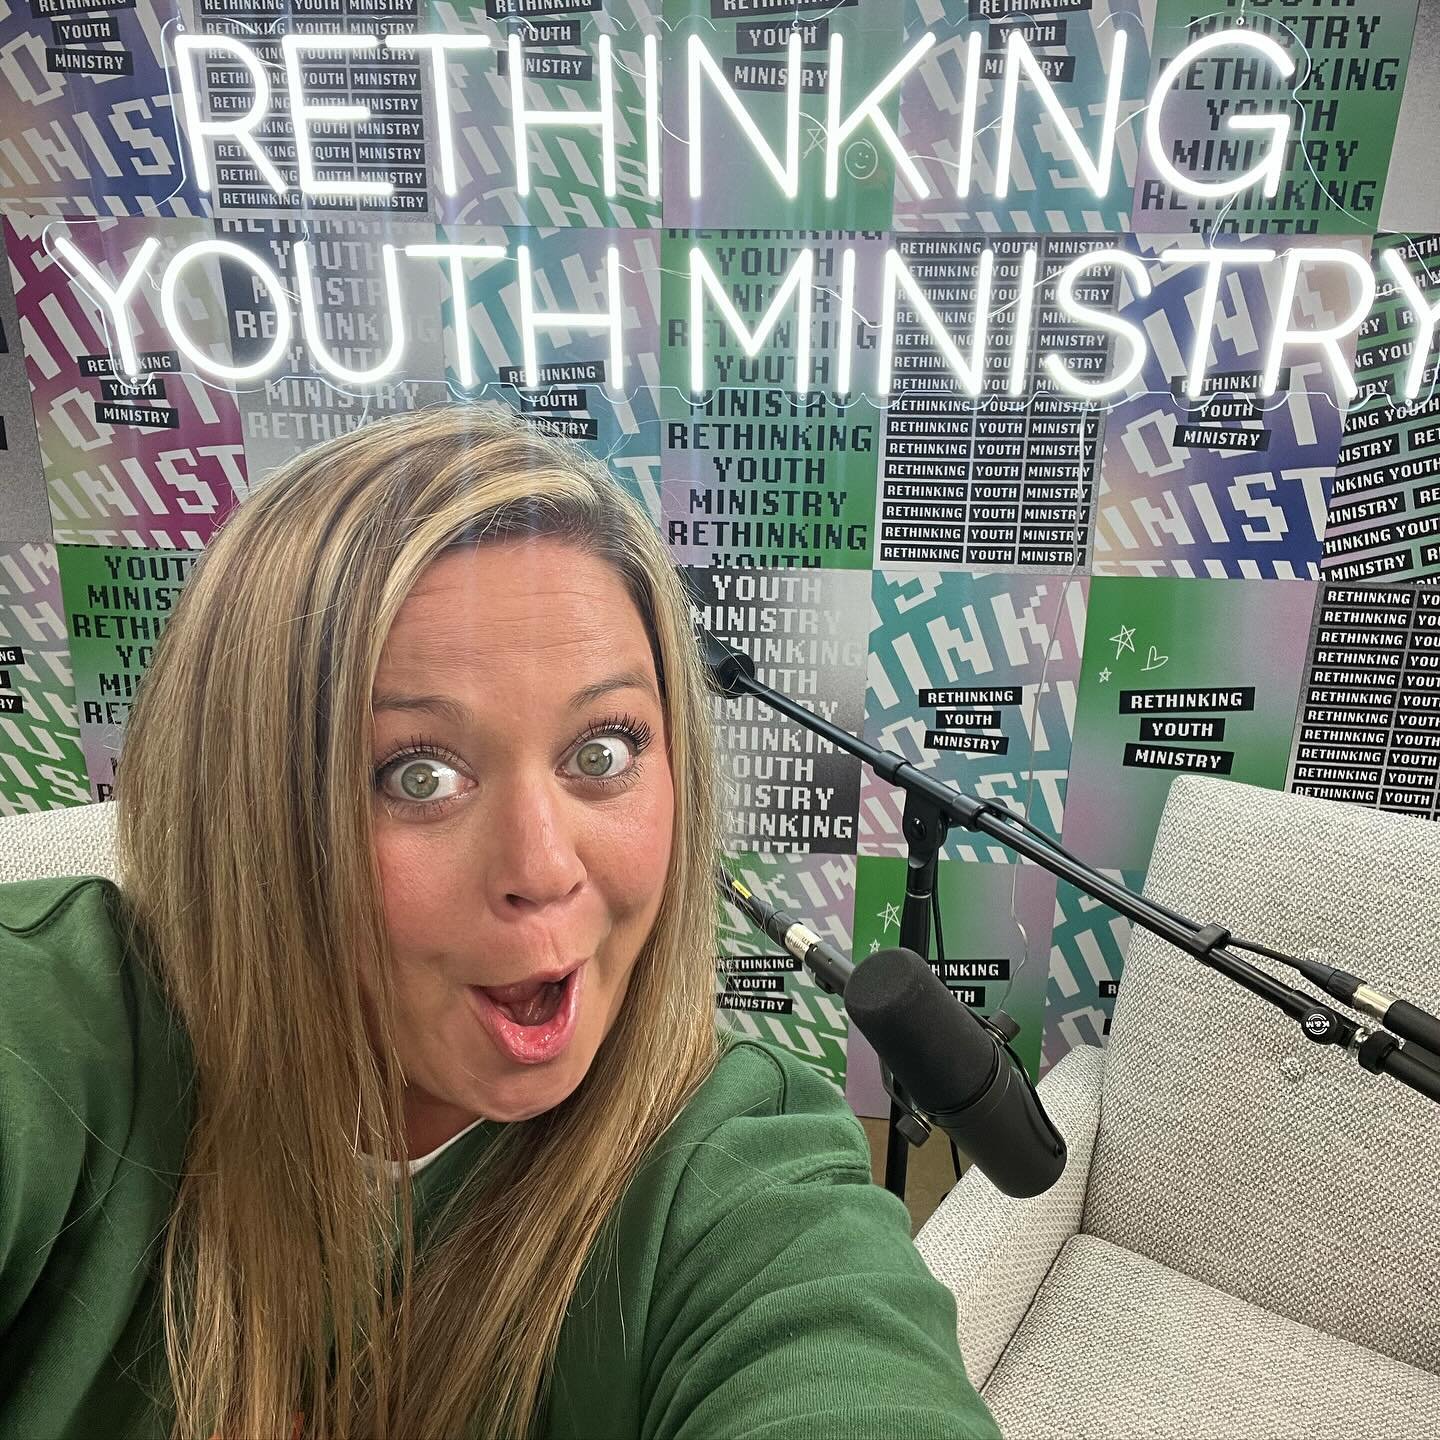 Today marks one year of the RETHINKING YOUTH MINISTRY podcast being back on the airwaves! 🎙️💬 🎉✨

Thank you to the MANY of you who consistently urged us to bring it back, those who contributed SO MANY brilliant ideas, those who tuned in faithfully